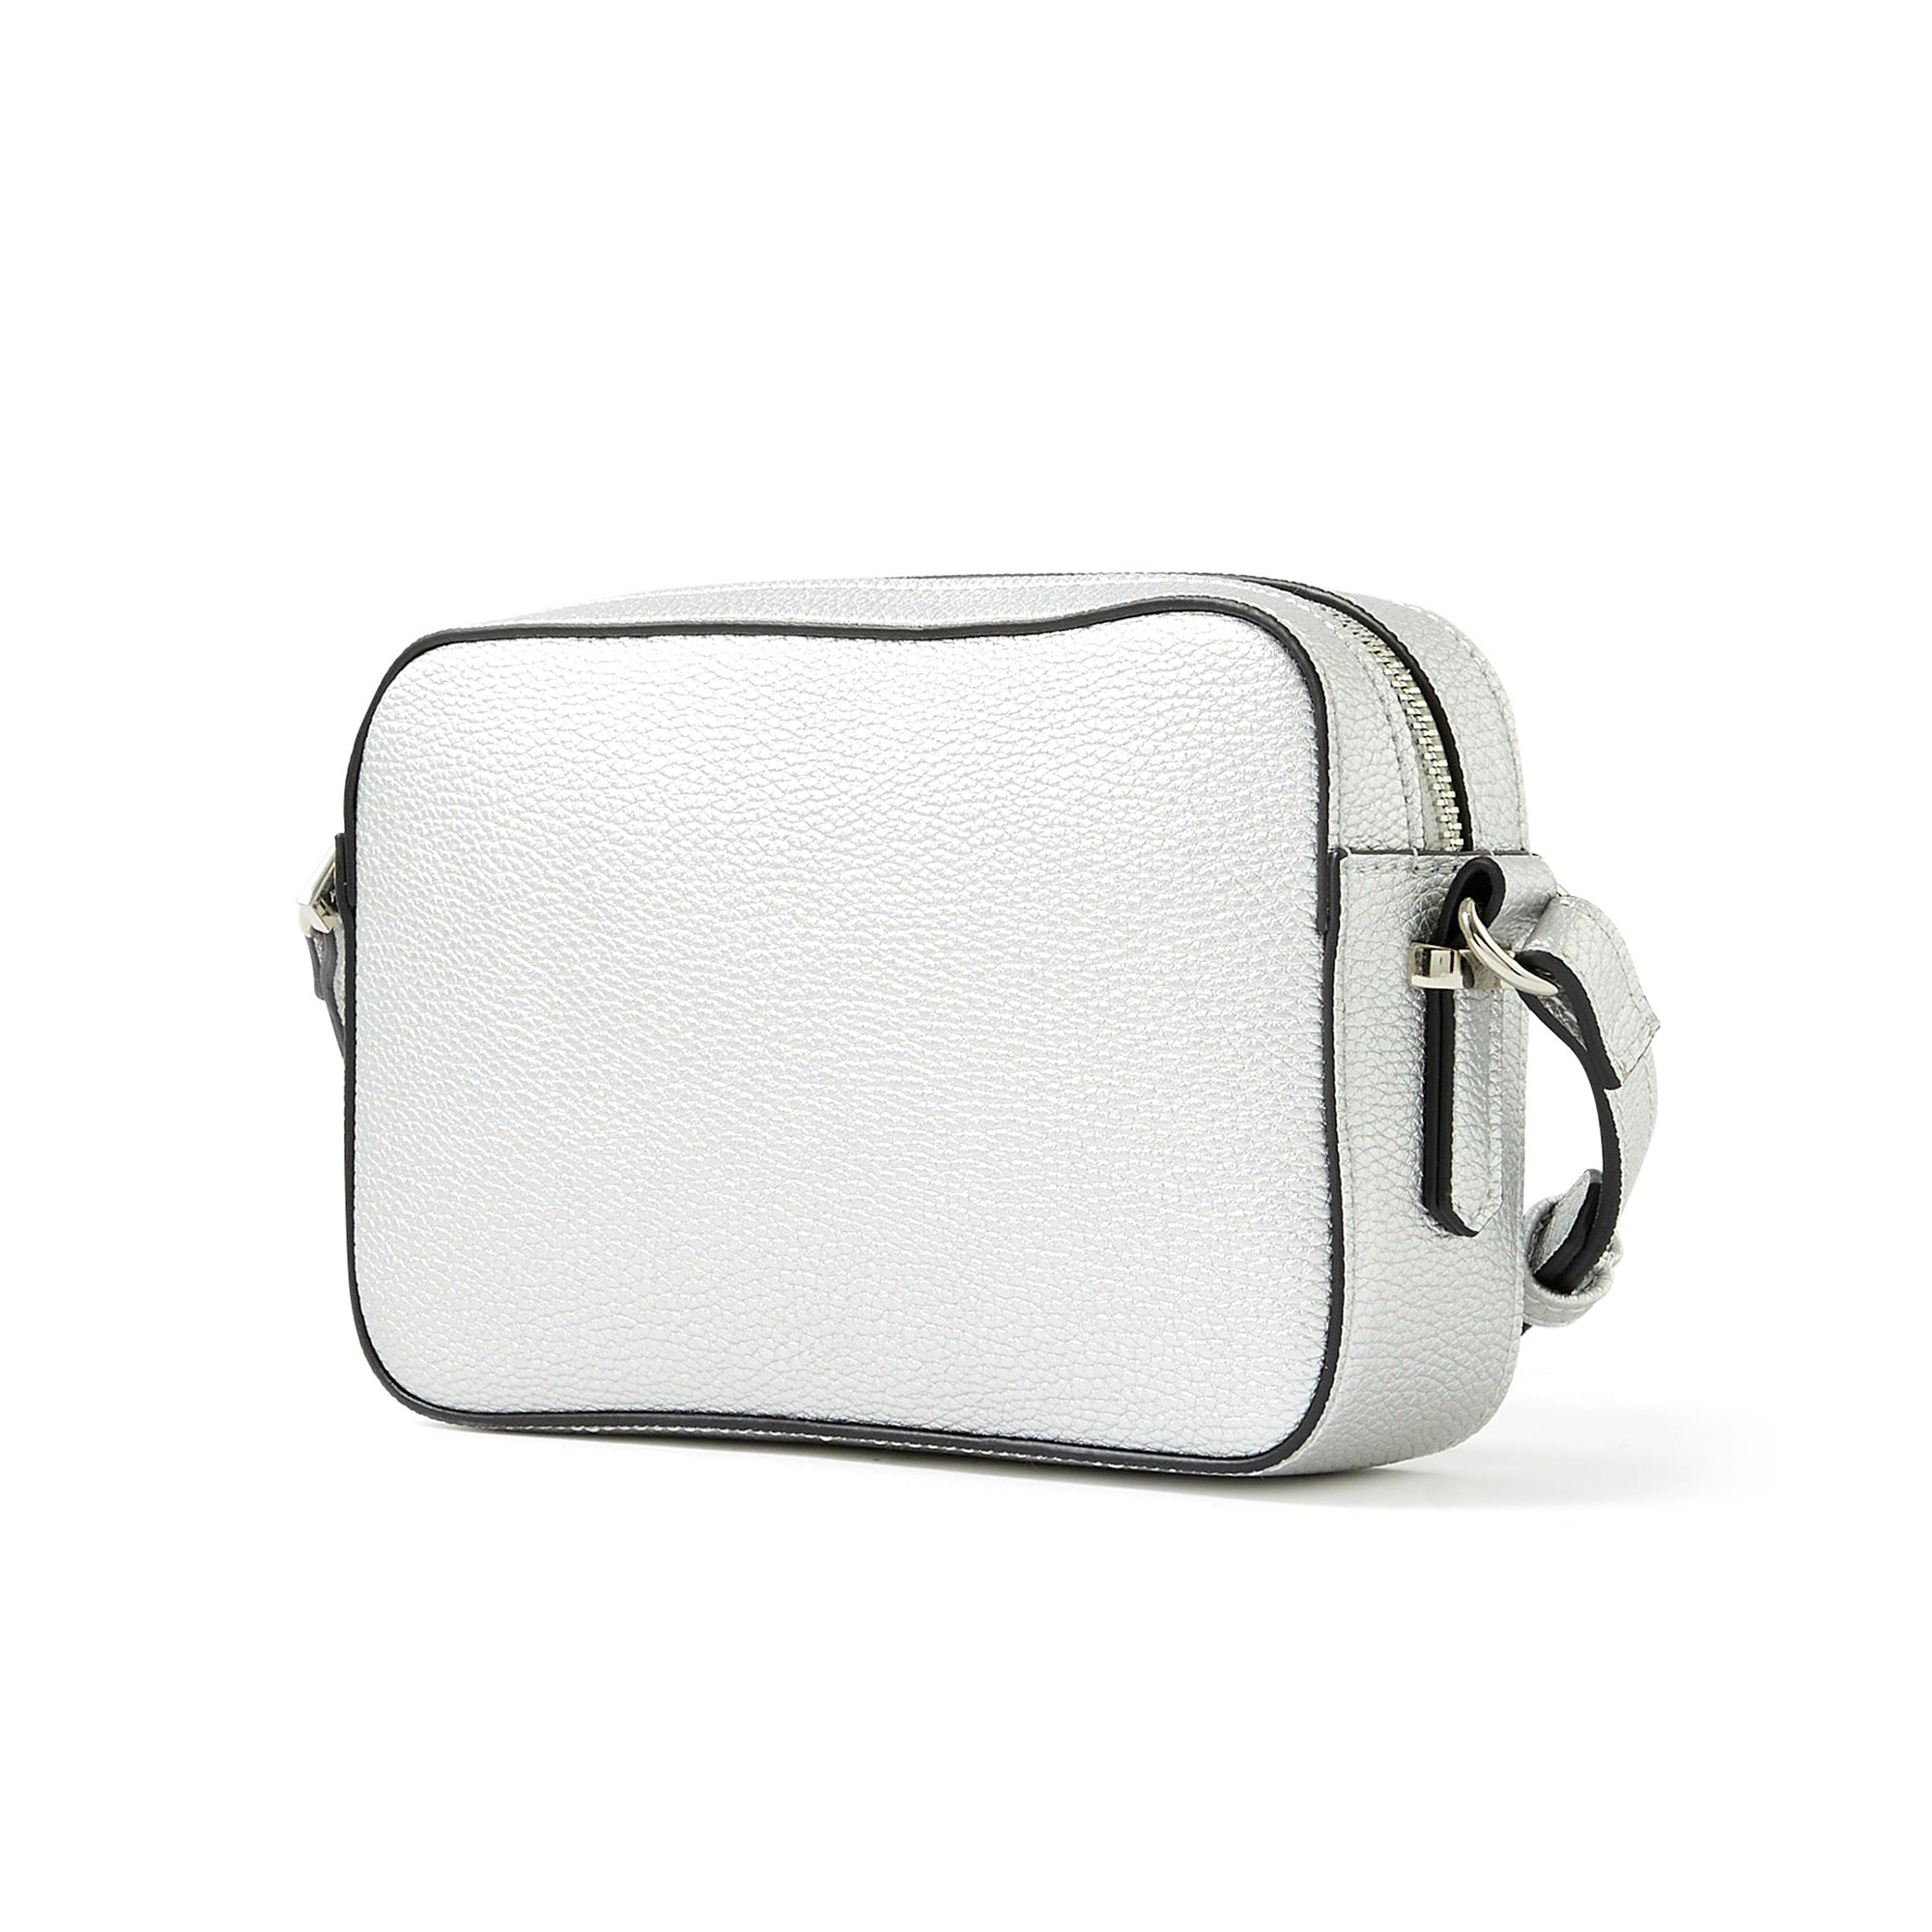 Accessorize London women's Faux Leather Silver Piper Sling bag